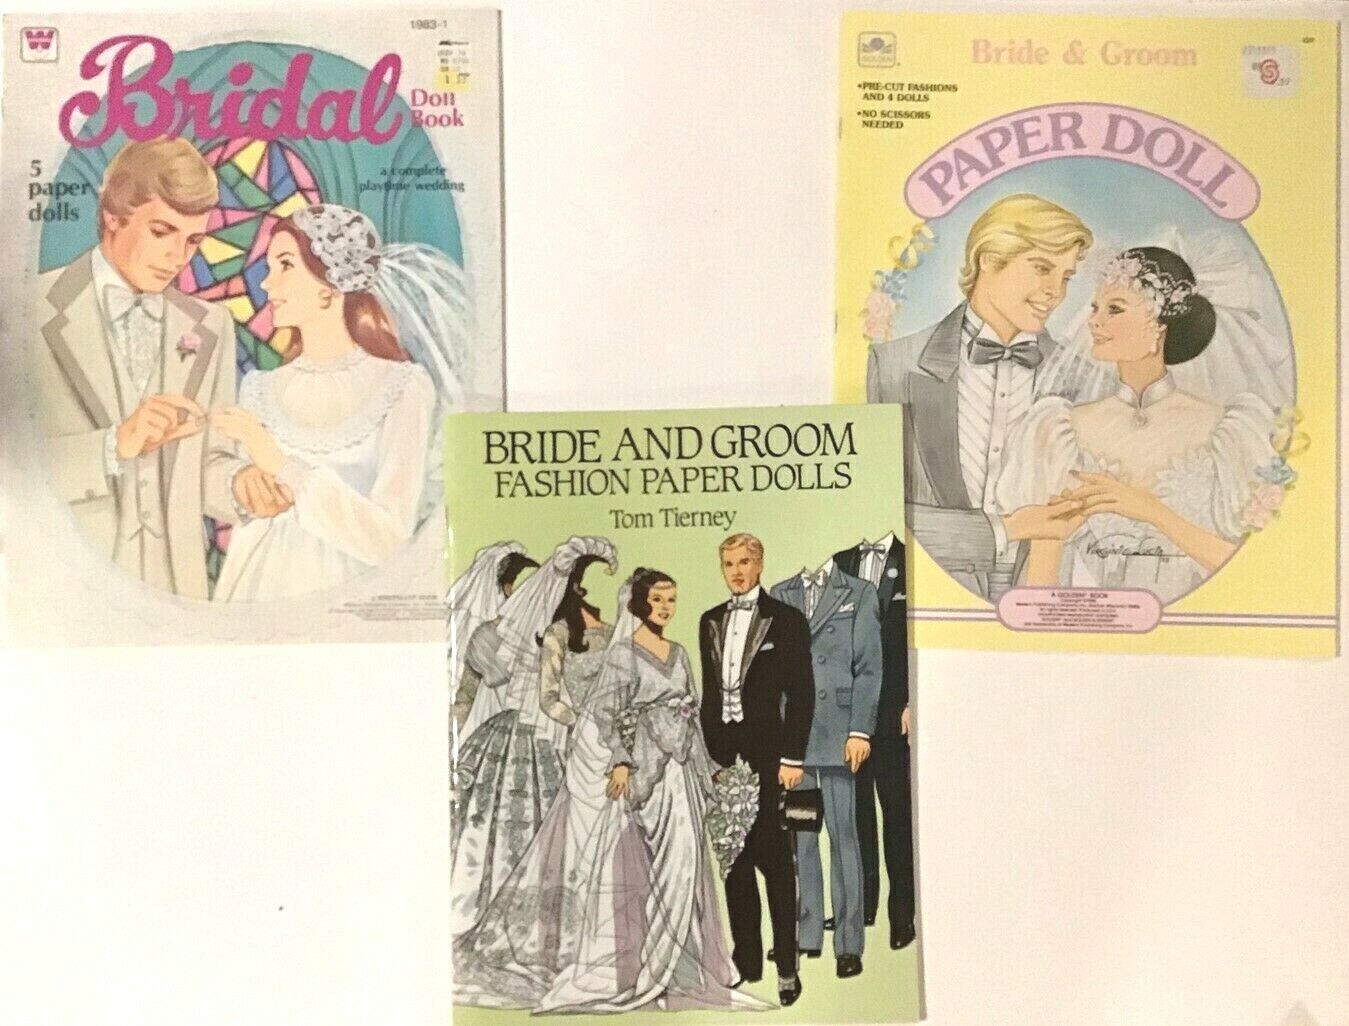 Paper Doll Cut Out Books - lot of 3 - Bridal, Bride & Groom (Golden & Tierney) Golden, Tom Tierney & Whitman